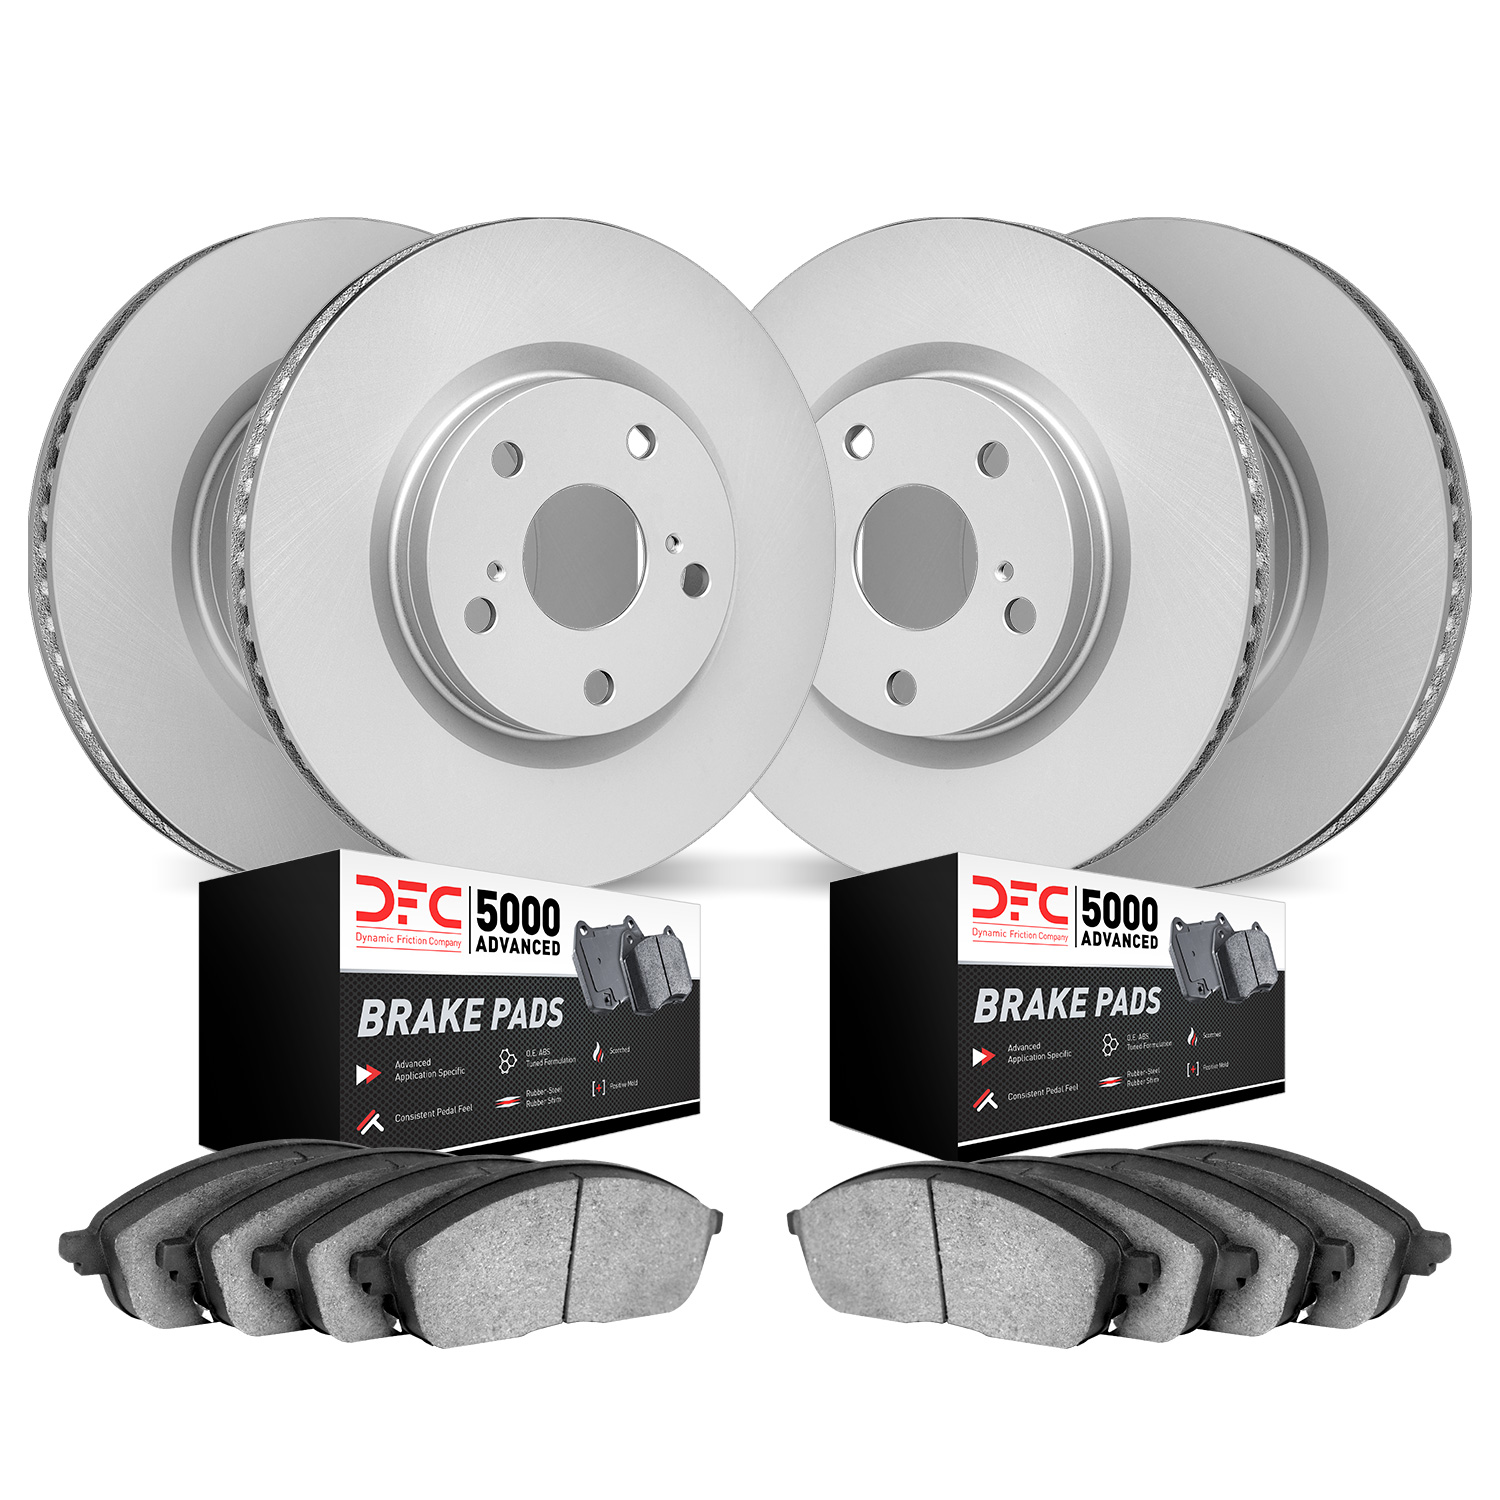 4504-11022 Geospec Brake Rotors w/5000 Advanced Brake Pads Kit, Fits Select Land Rover, Position: Front and Rear